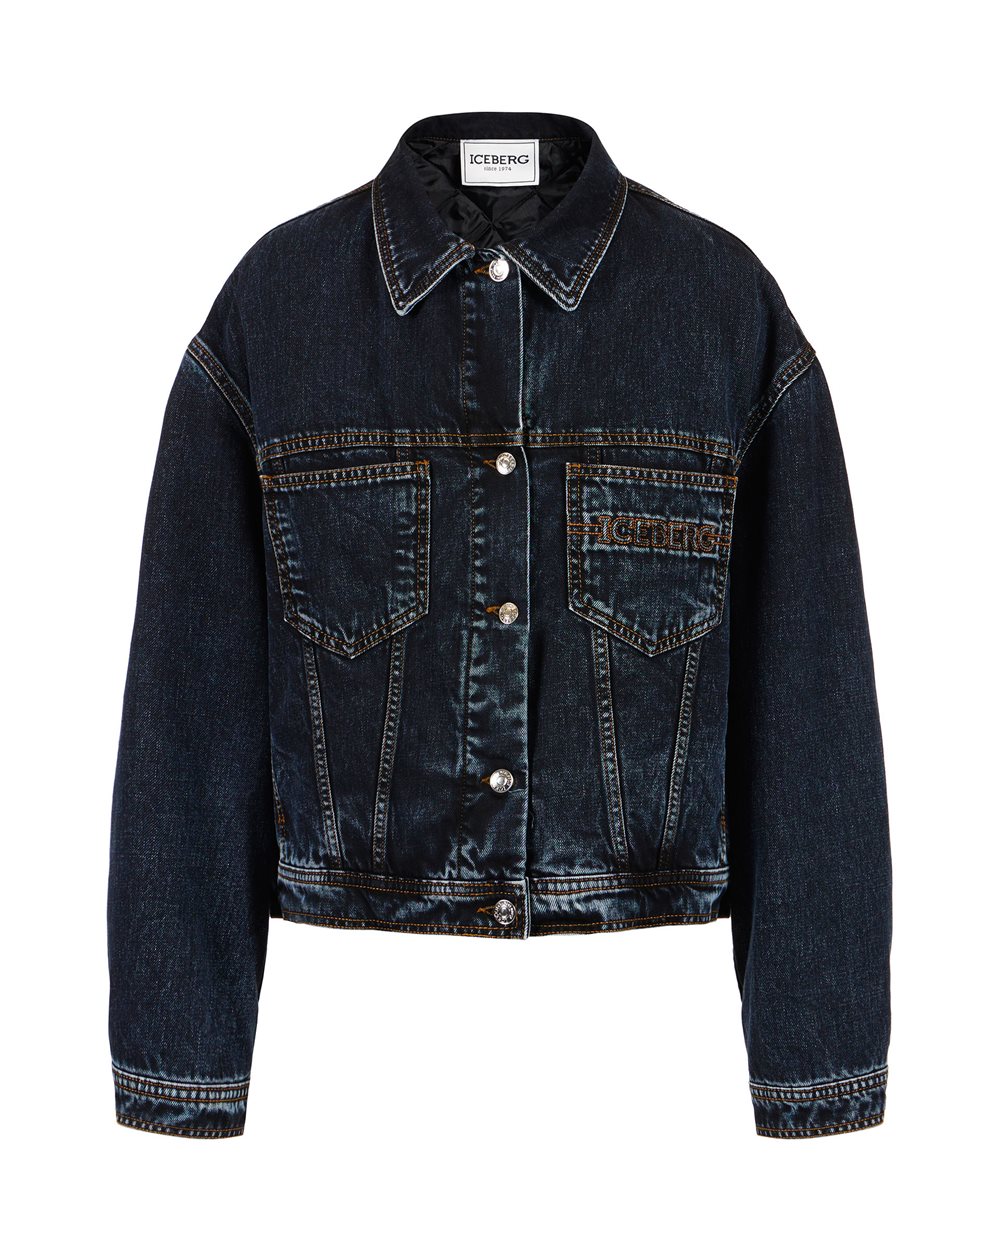 Denim jacket with quilted interior - carosello HP woman shoes | Iceberg - Official Website